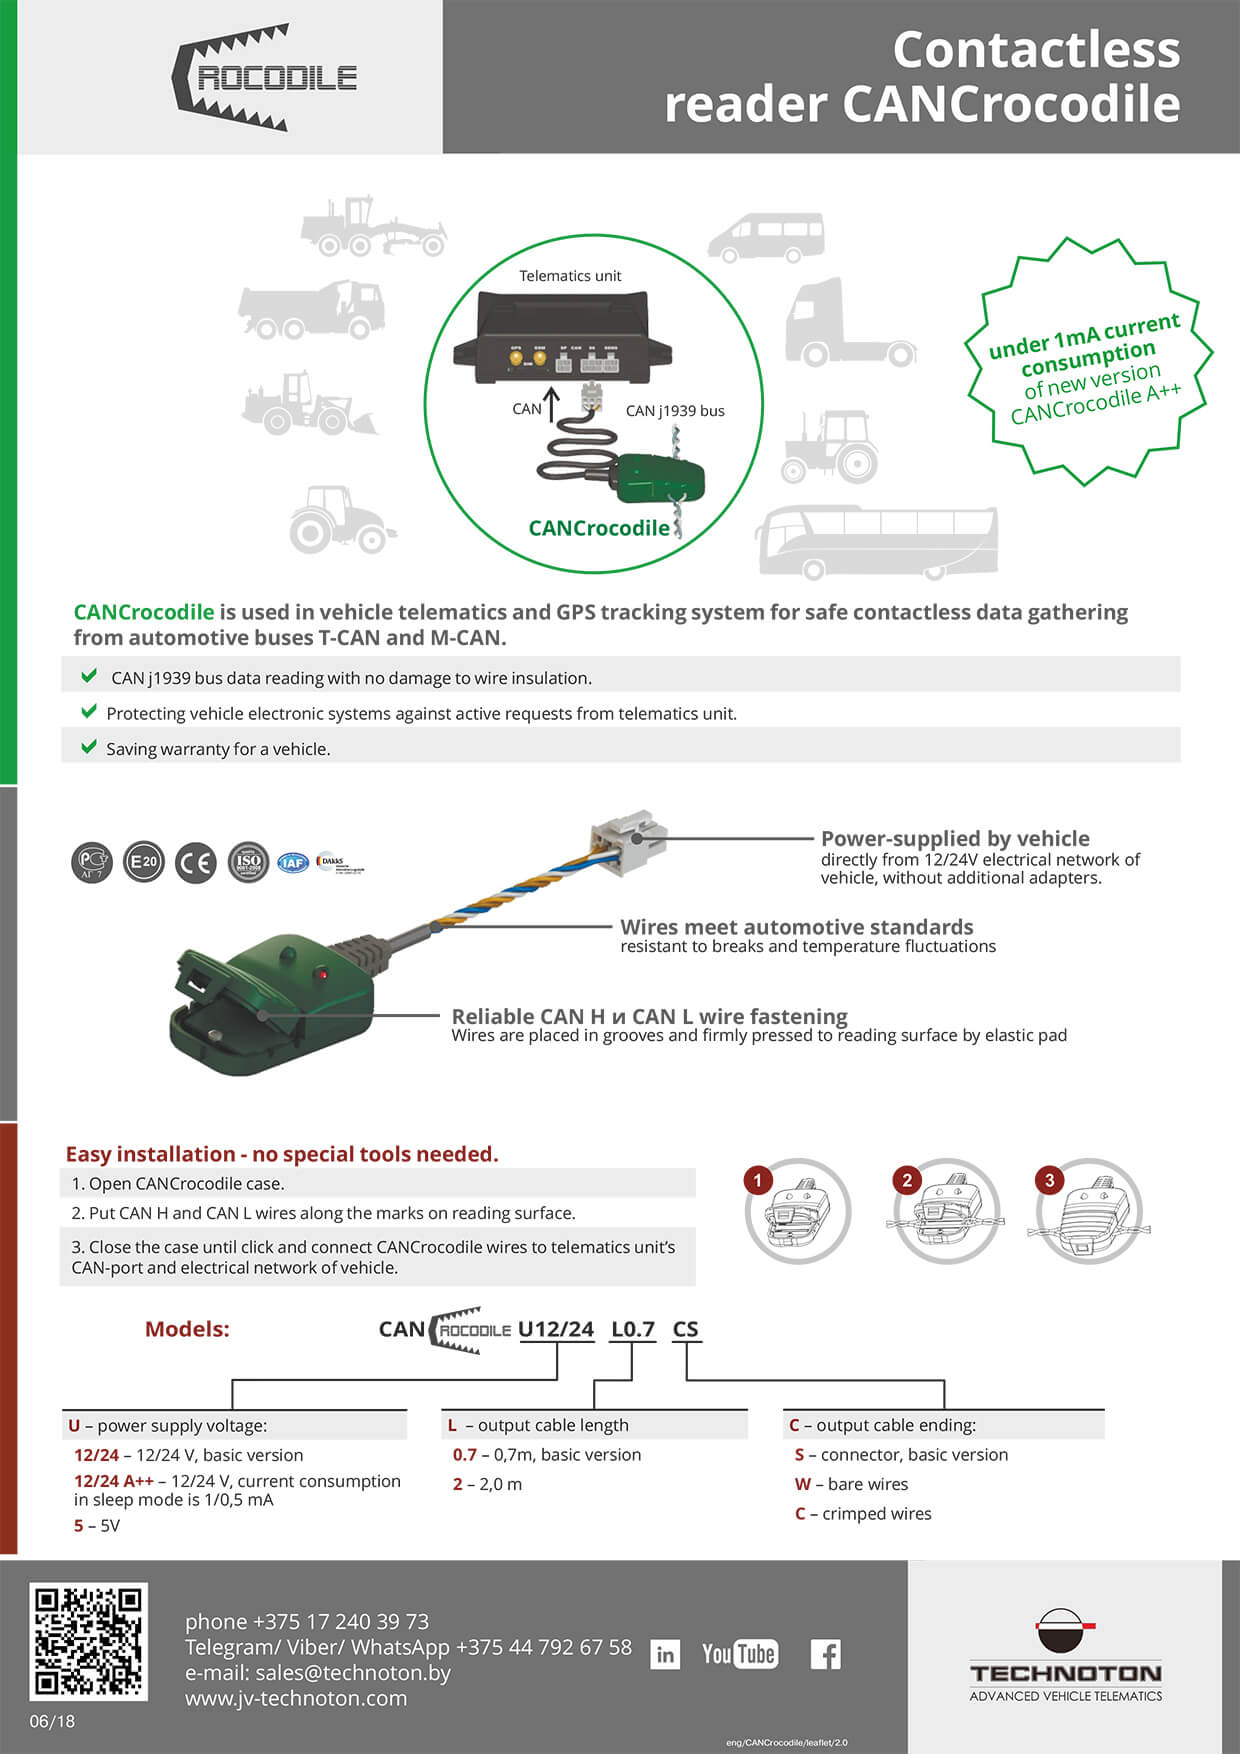 Leaflet "CANCrocodile contactless reader" 